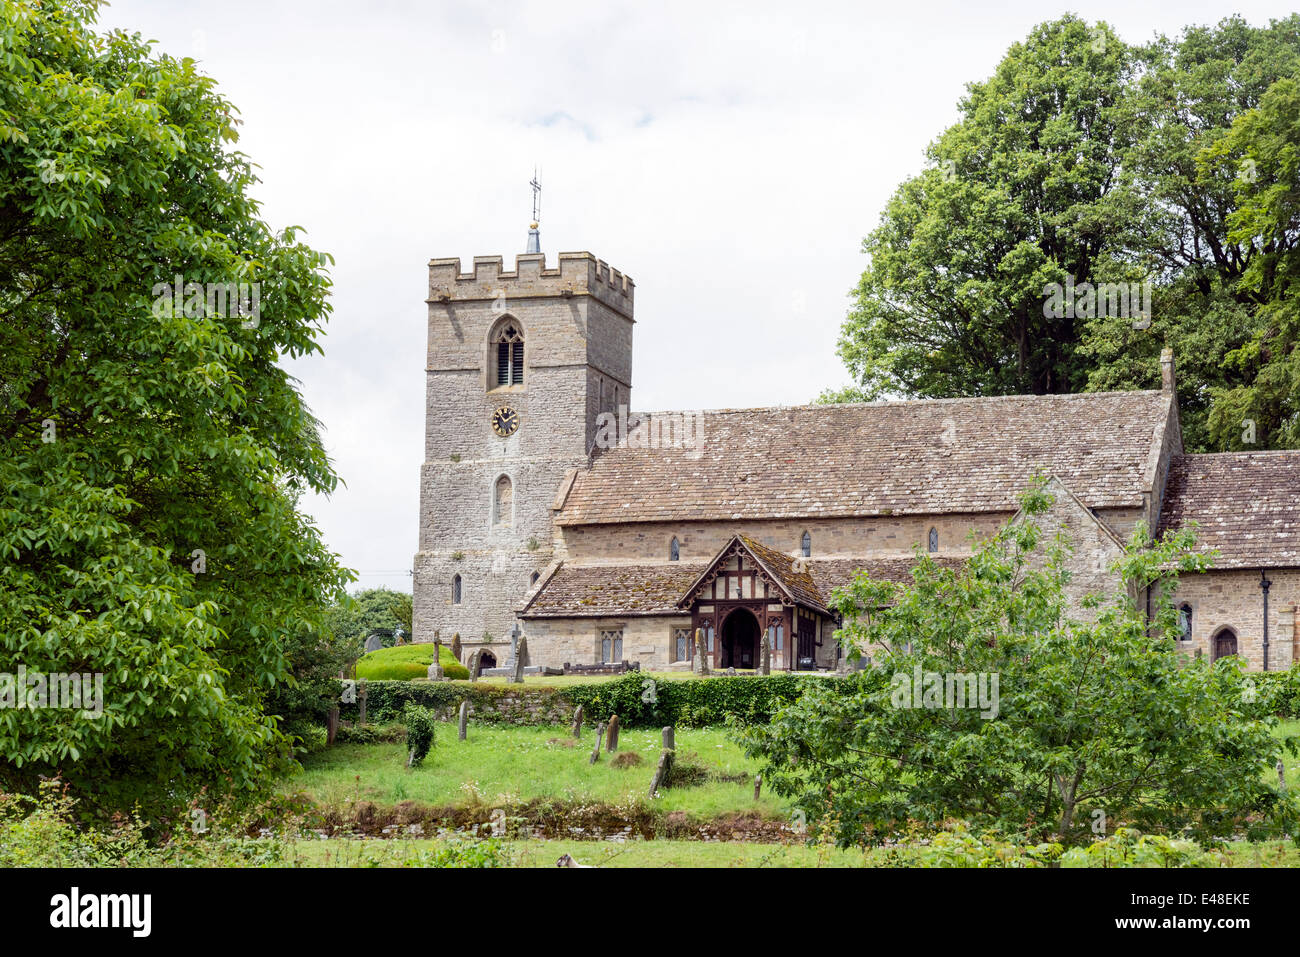 St Michael & All Angels church at Lyonshall, Herefordshire, UK. Village church with graveyard. Stock Photo